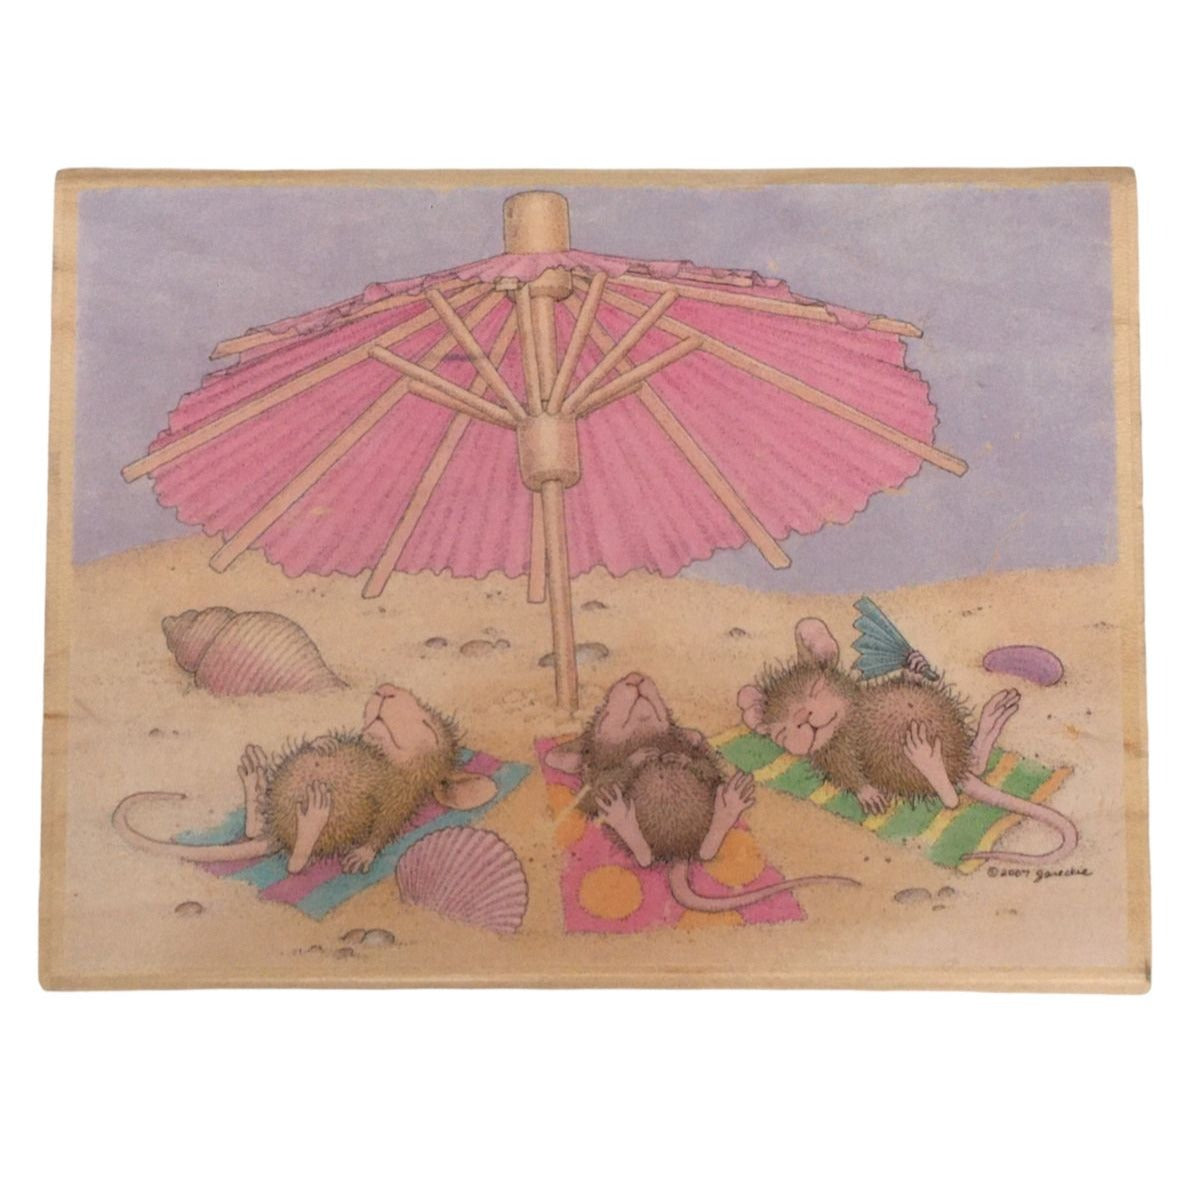 Stampabilities Rubber Stamp House Mouse Beach Bums Amanda Muzzy Mudpie Umbrella